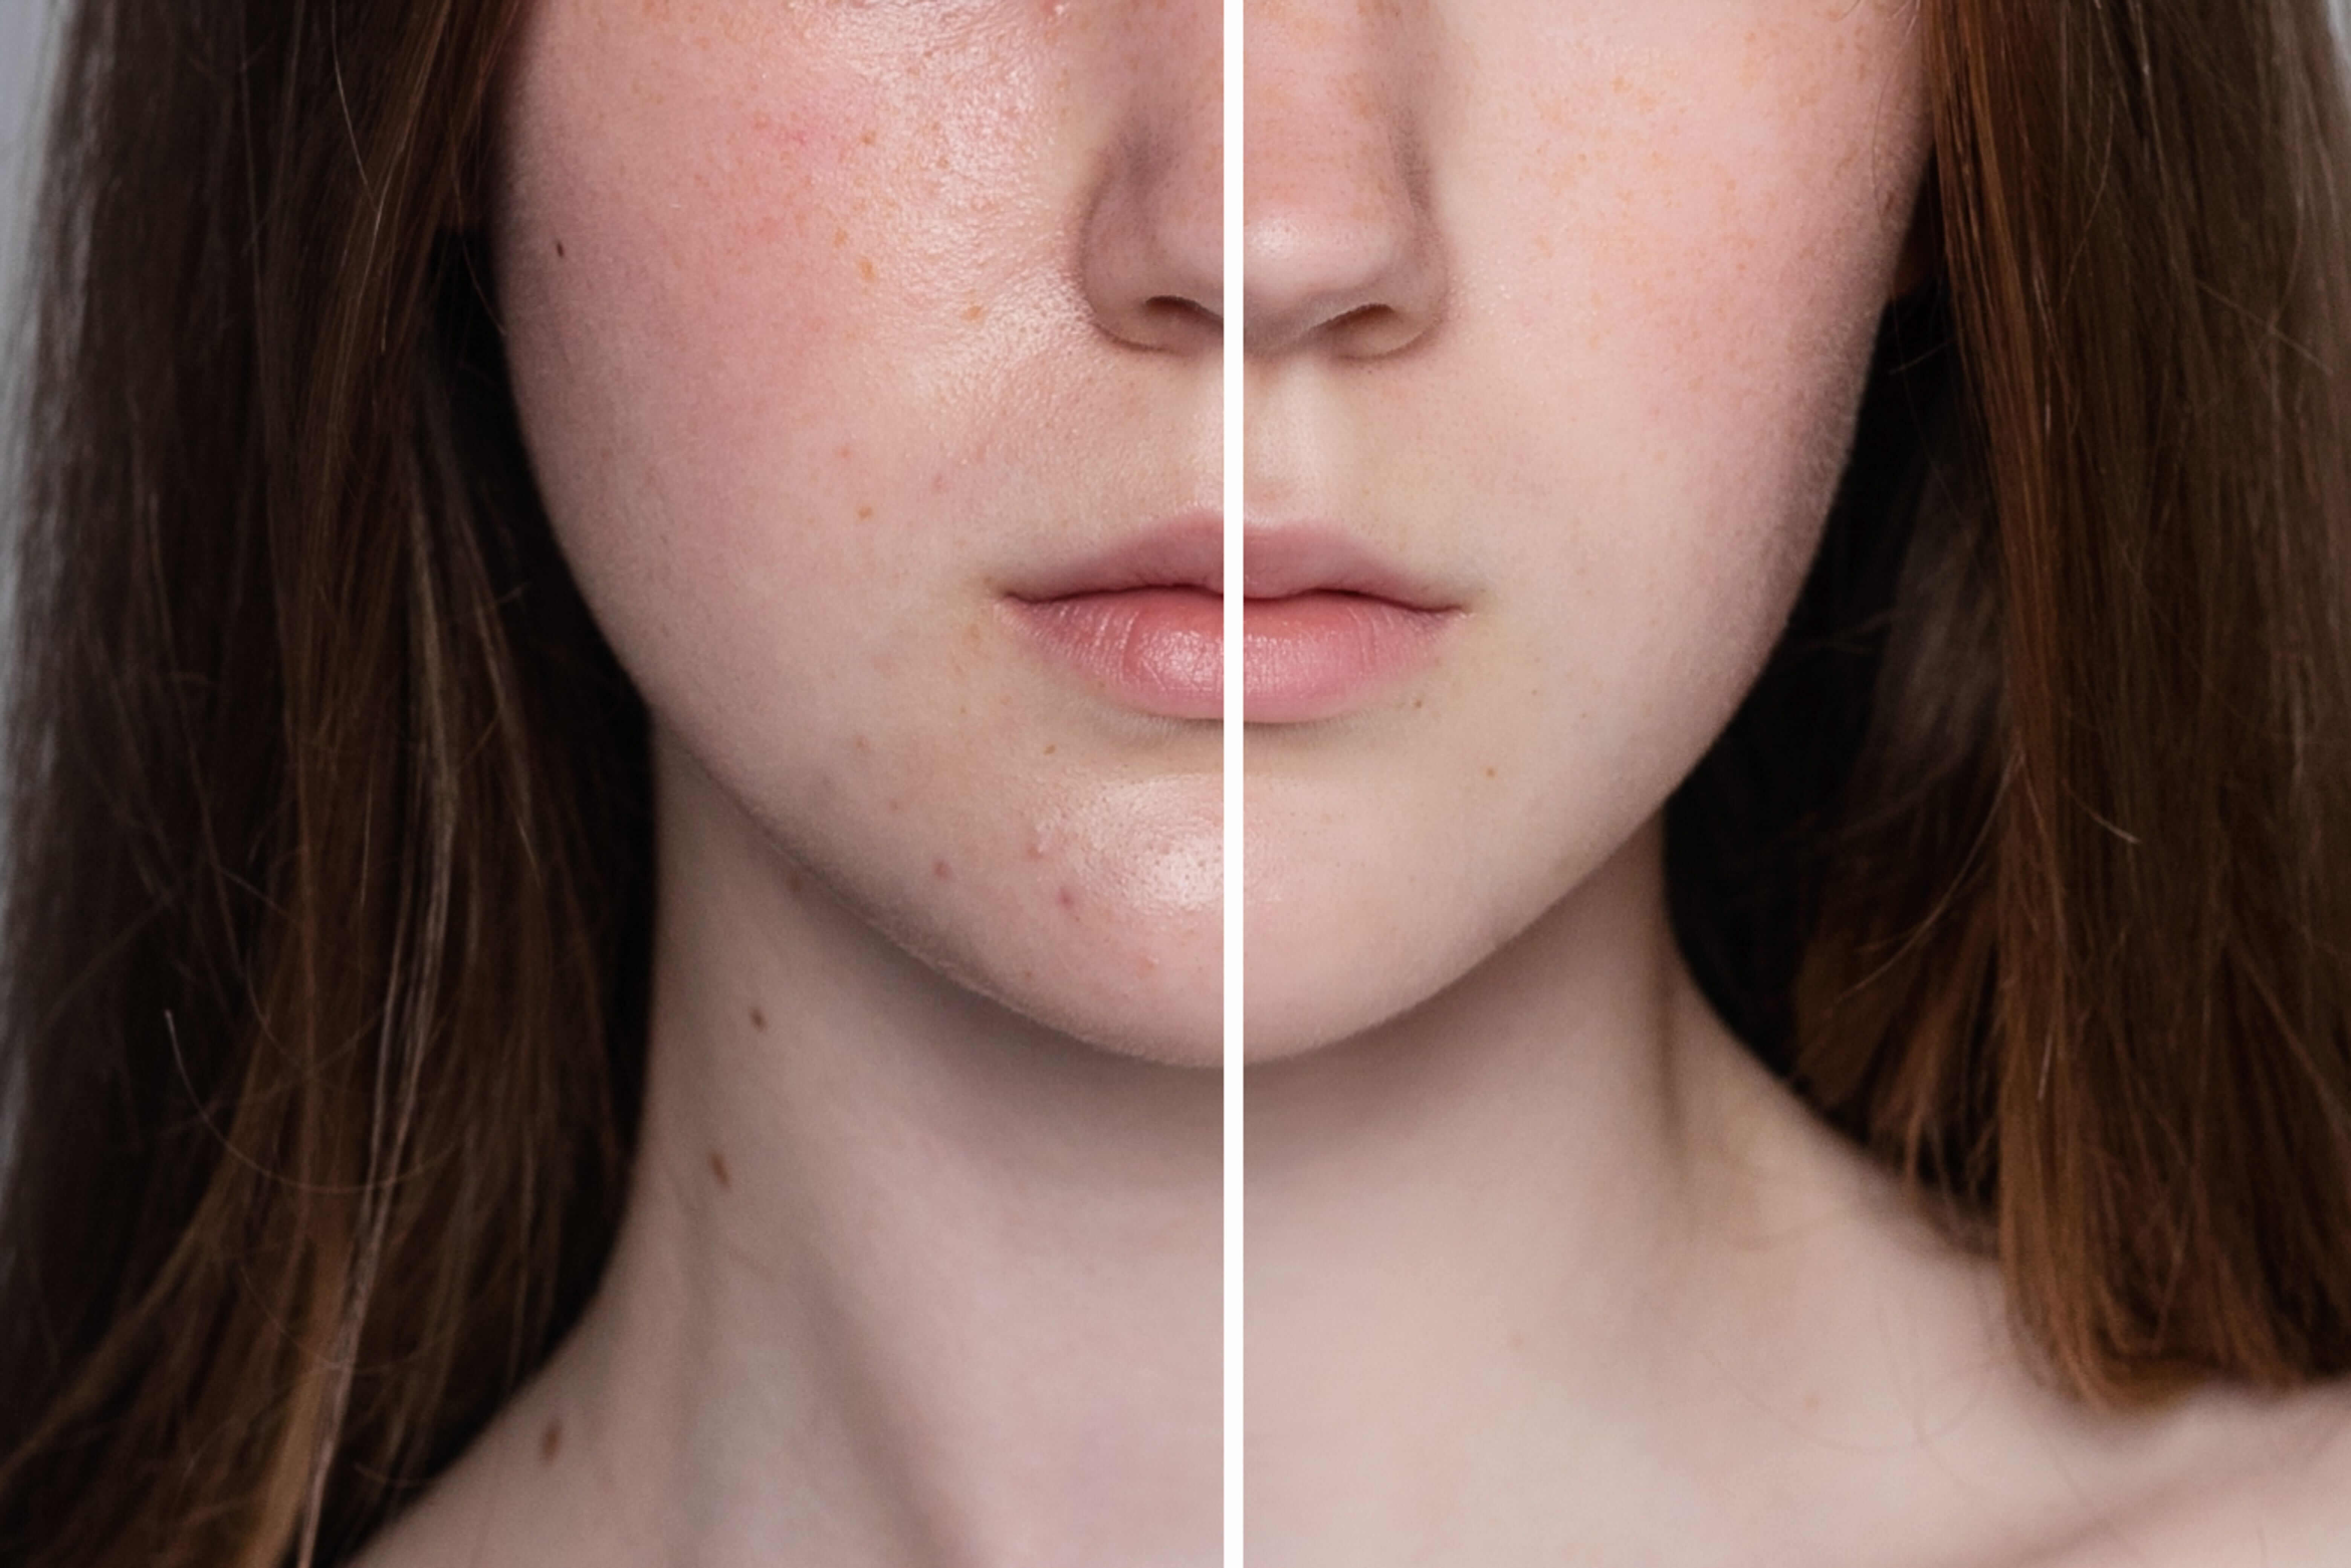 Before and after LaseMD treatment for acne scars.